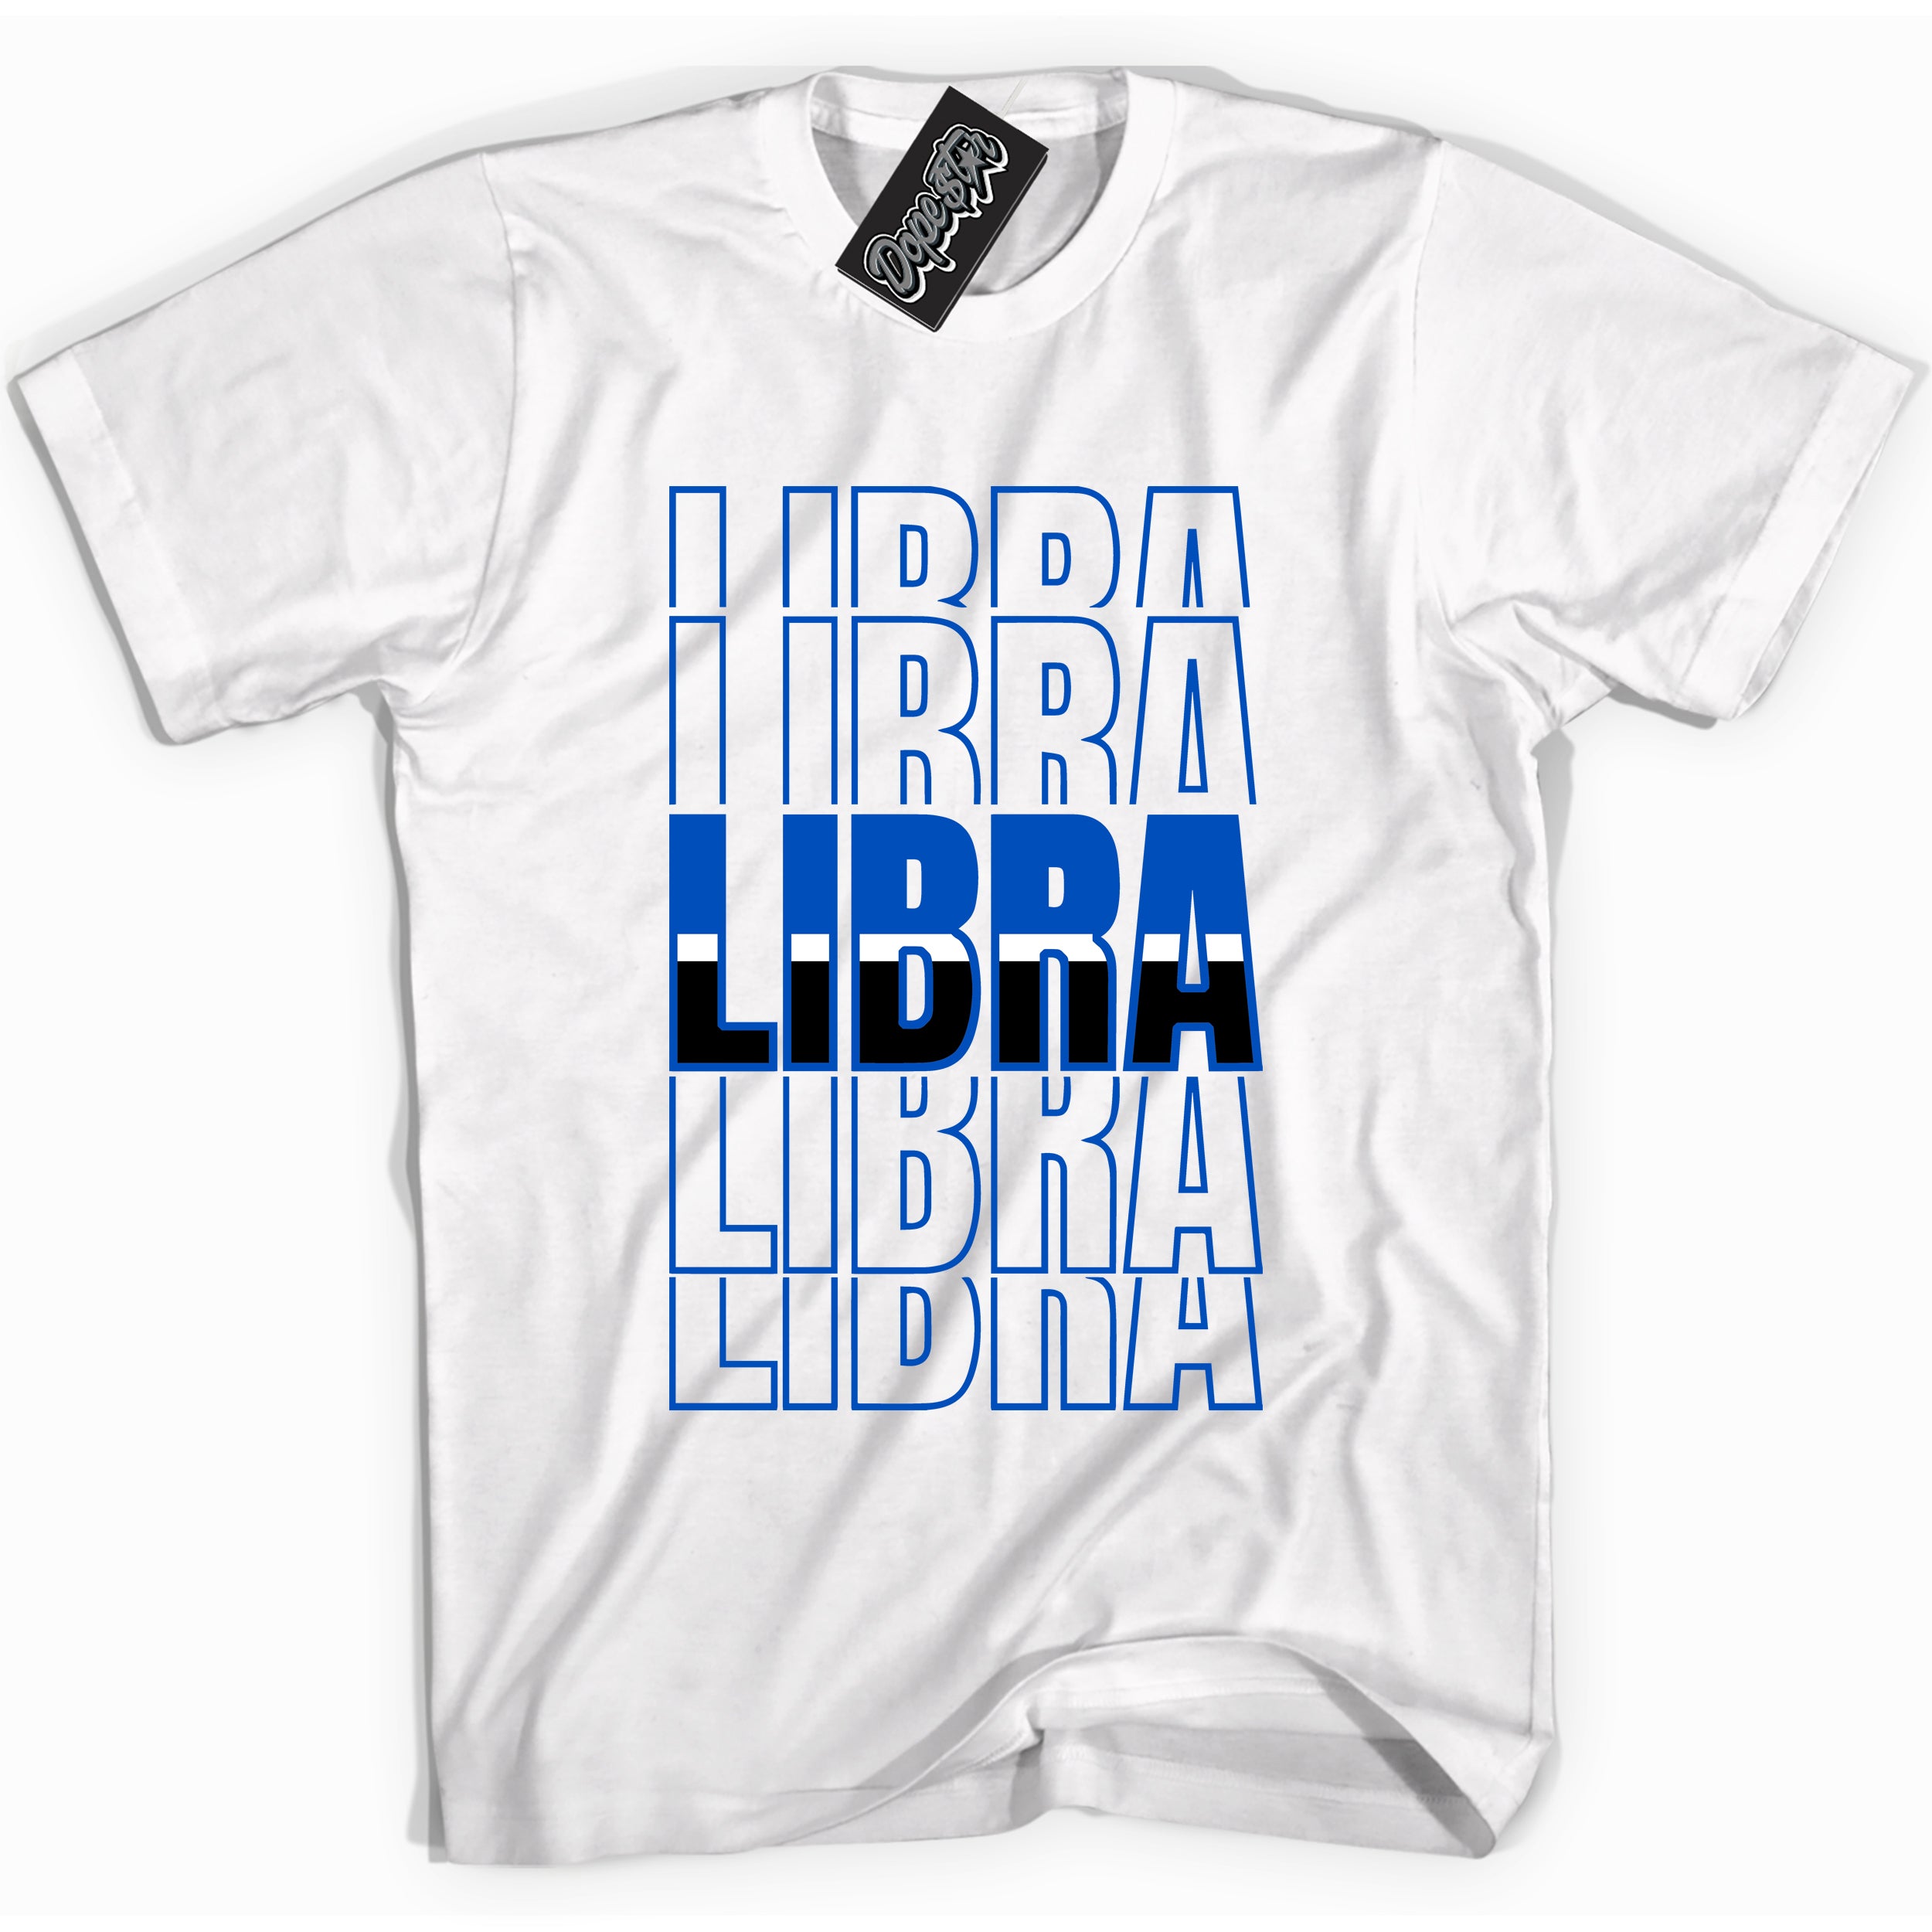 Cool White graphic tee with "Libra" design, that perfectly matches Royal Reimagined 1s sneakers 